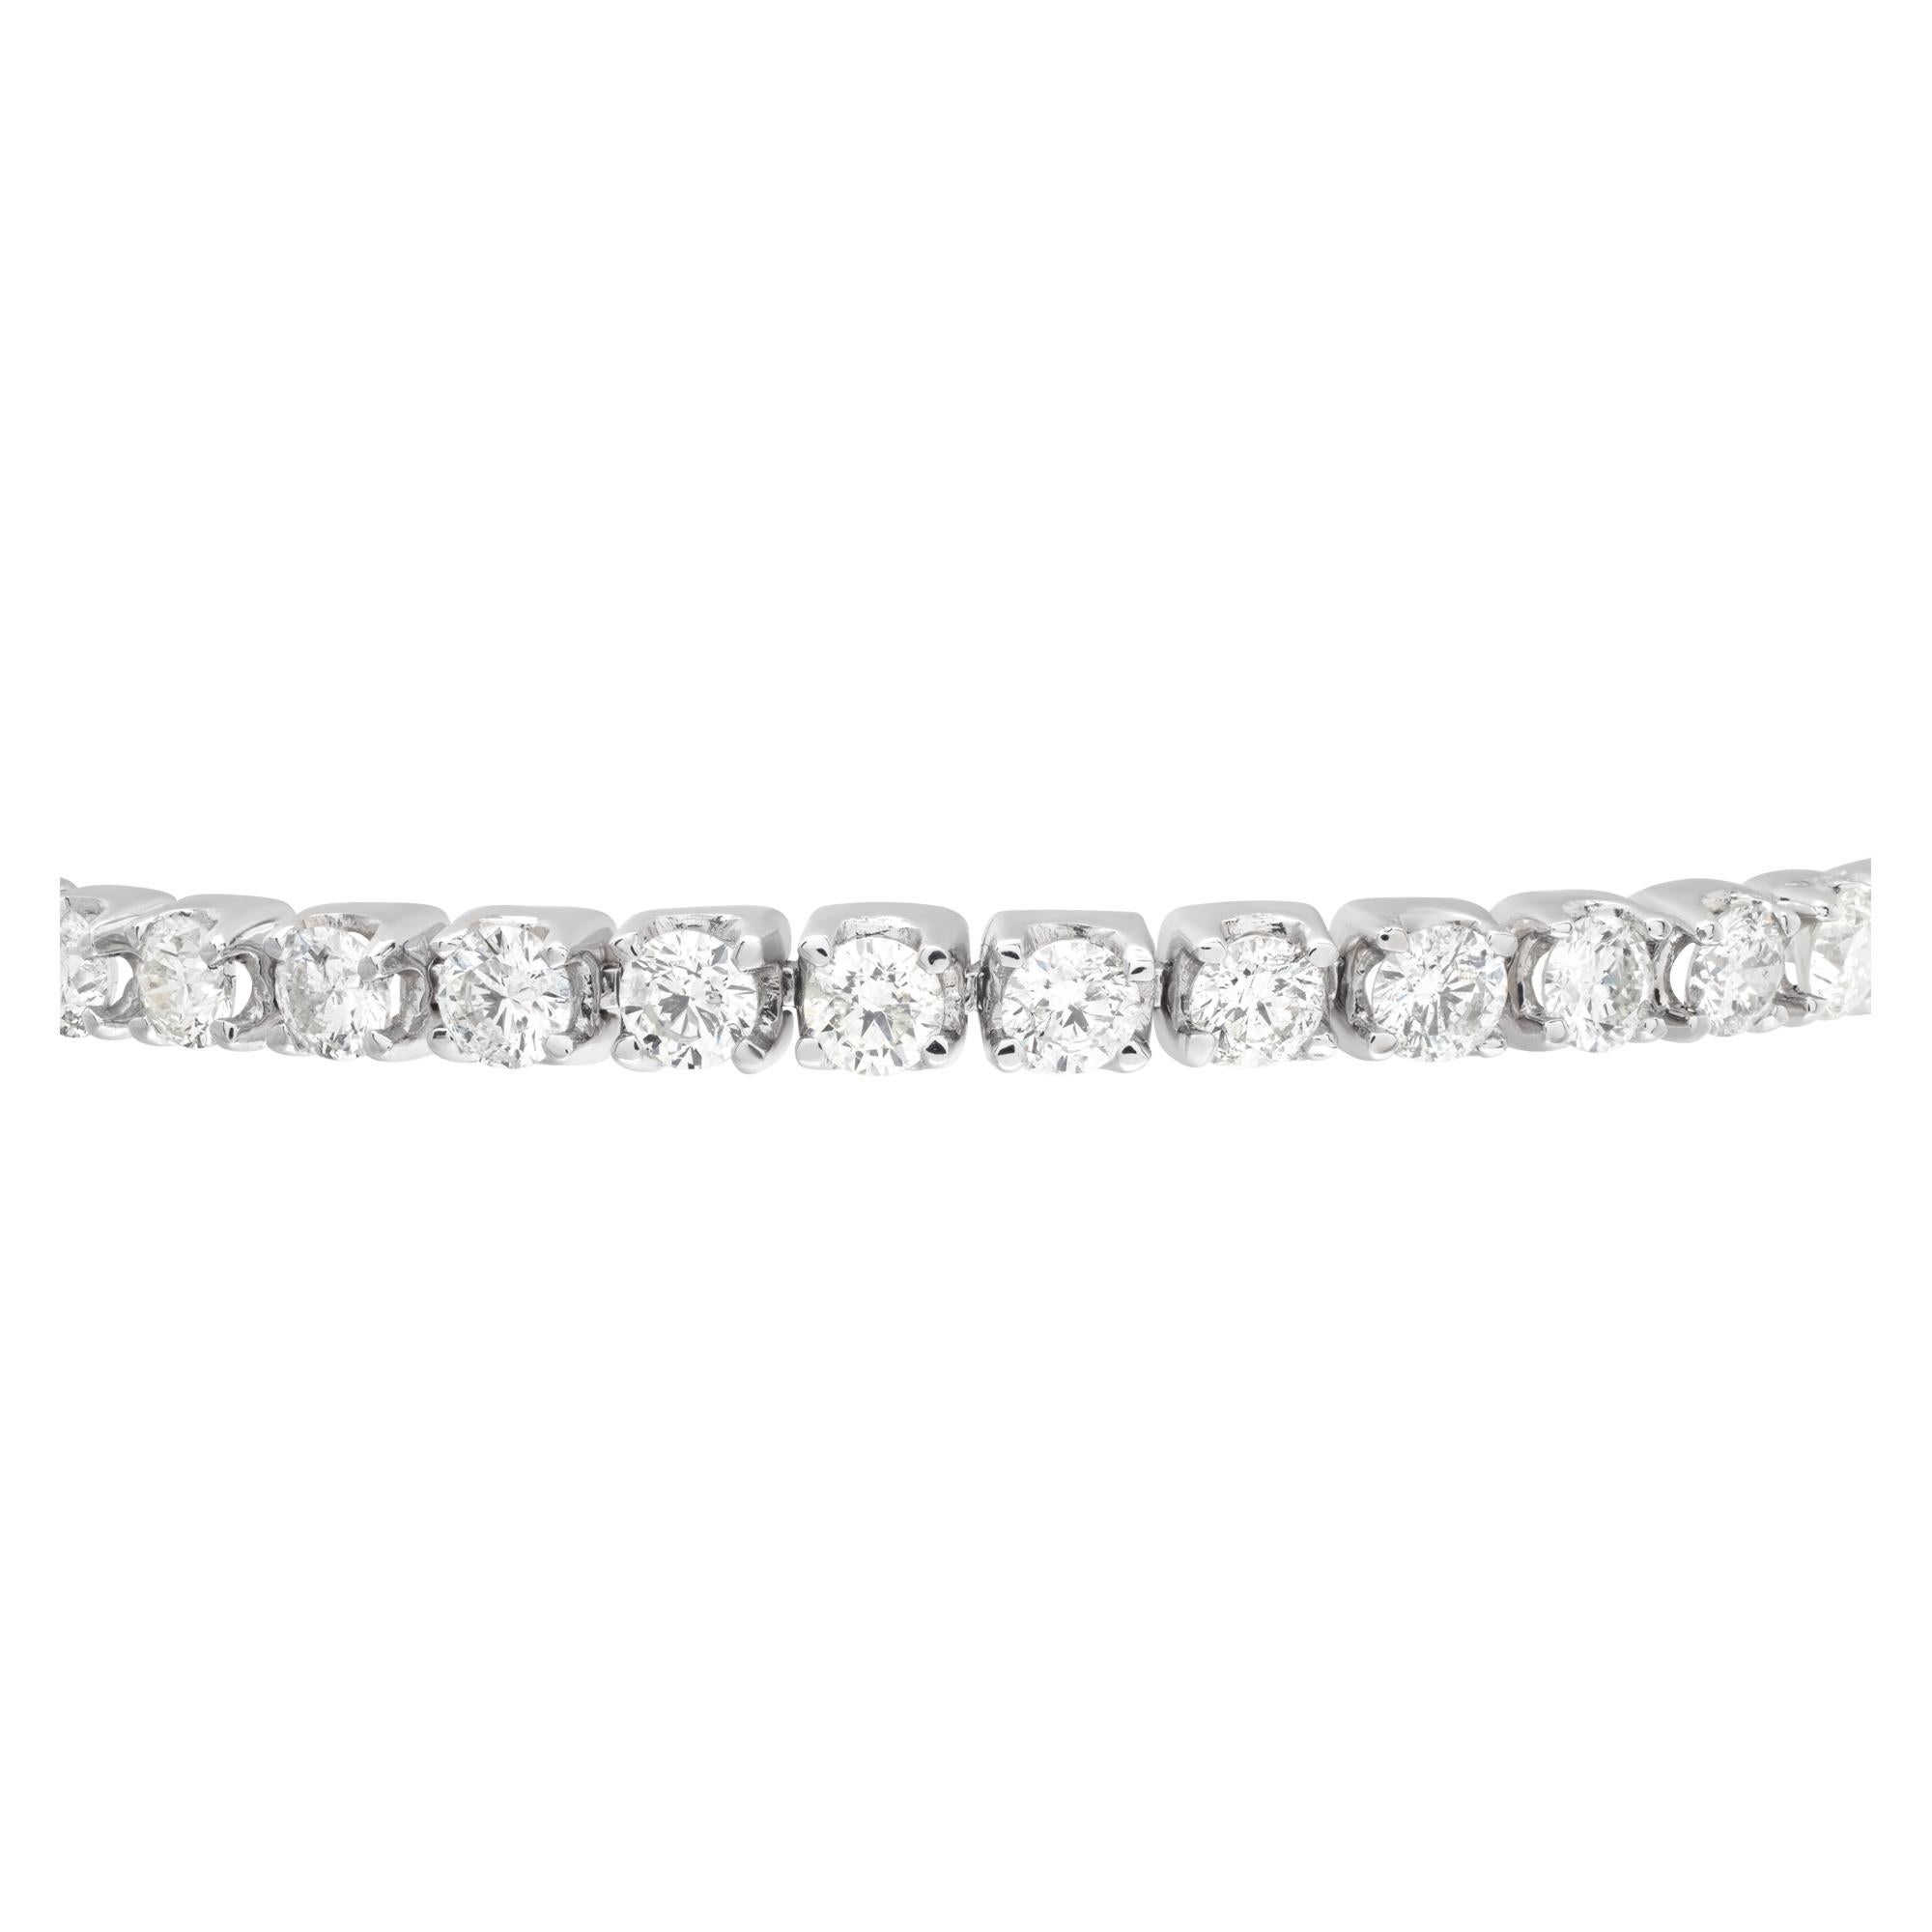 Sparkling line diamonds bracelet with approx. 8.49 carat round brilliant full cut diamond set in 14K white gold. Diamonds estimate H-I color, SI clarity. Length 8 inches.